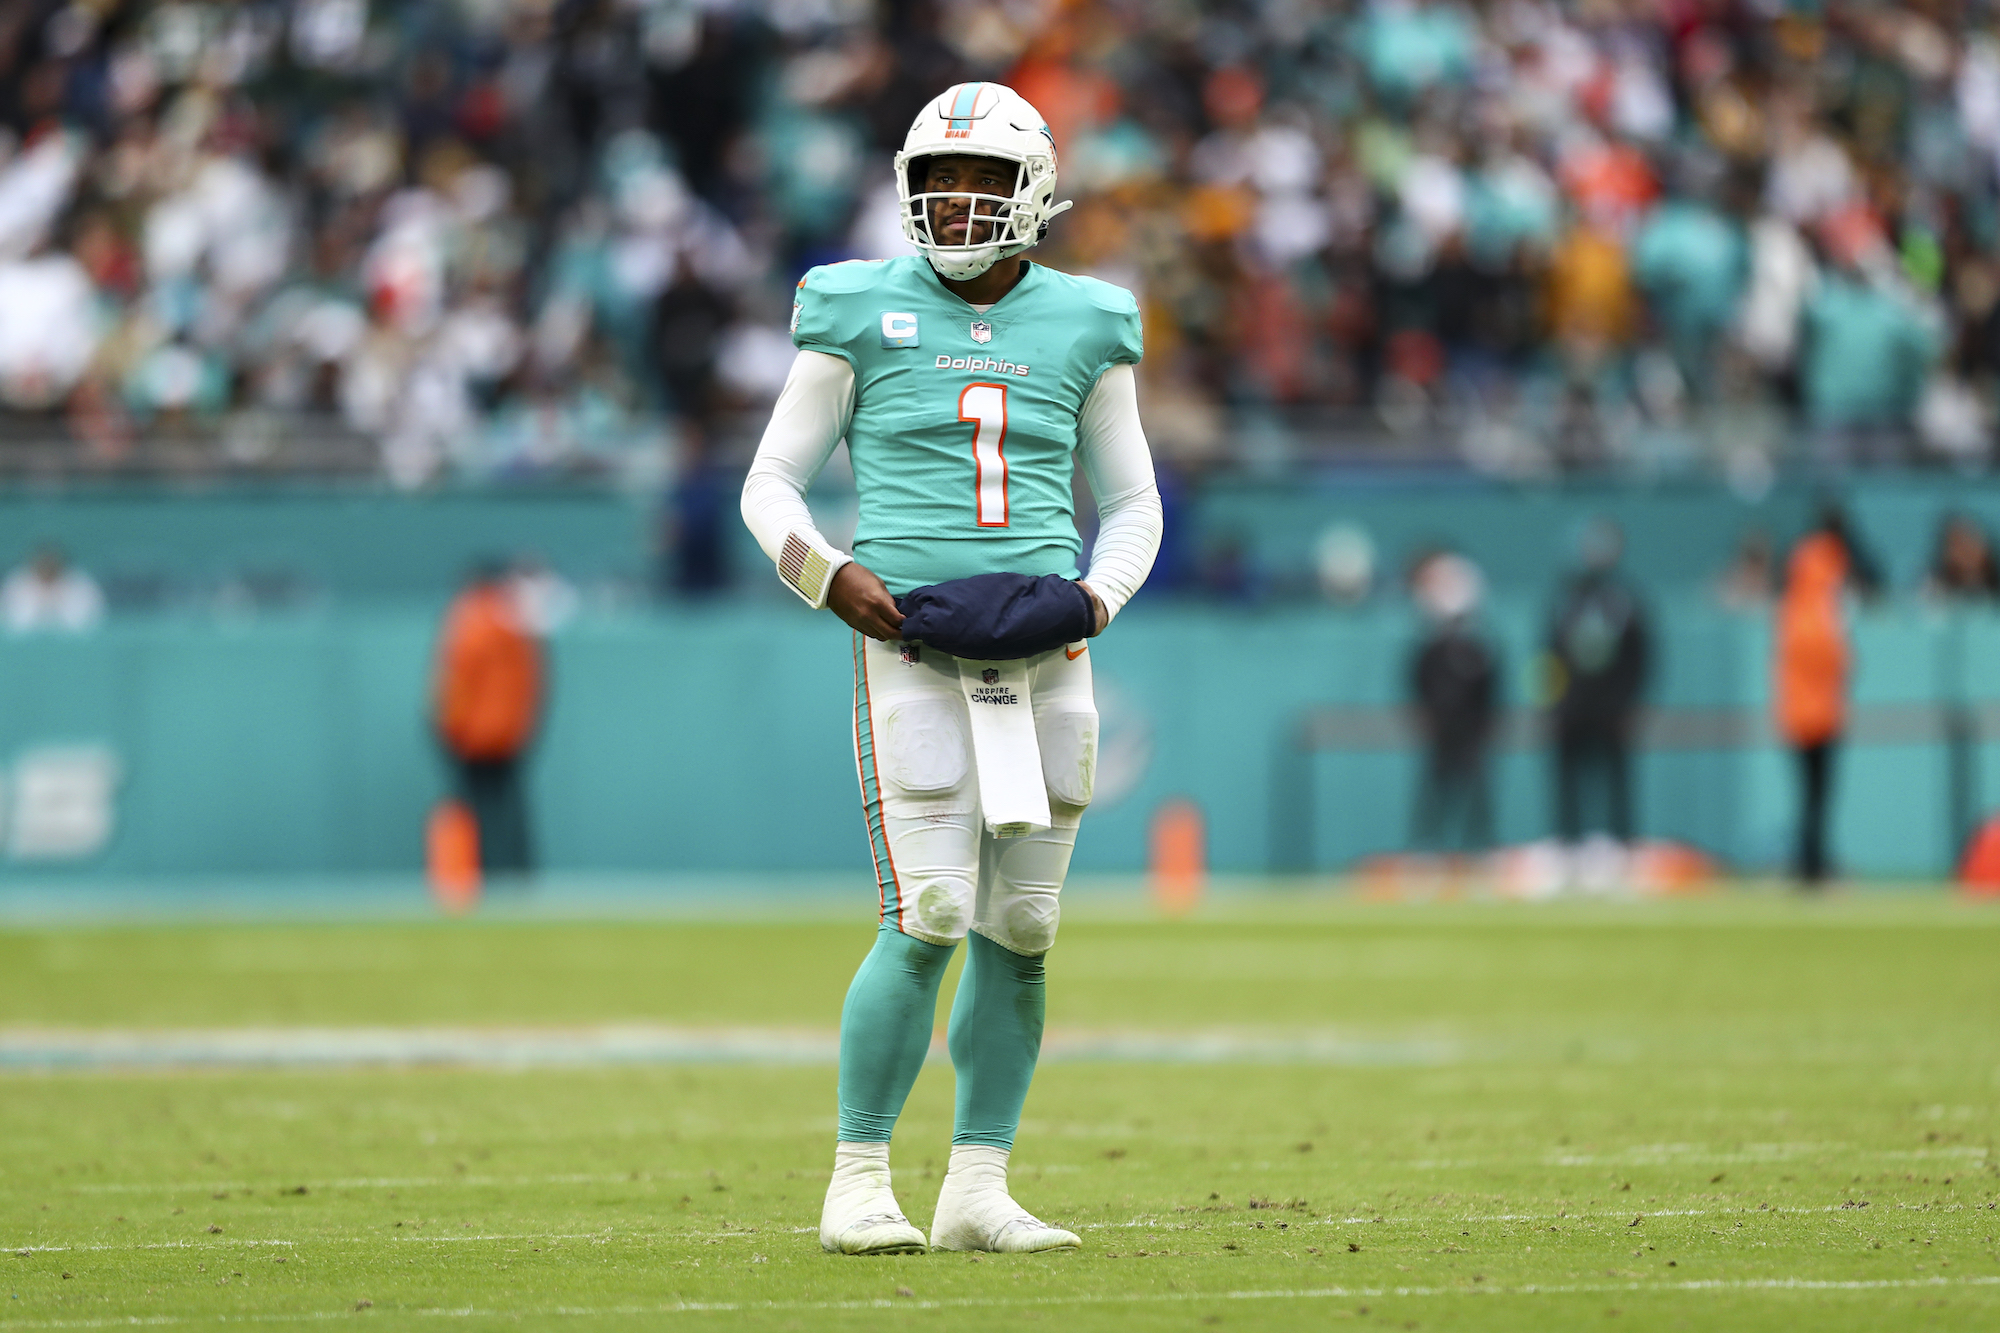 MIAMI GARDENS, FL - DECEMBER 25: Tua Tagovailoa #1 of the Miami Dolphins looks to the sidelines before a play during the fourth quarter of an NFL football game against the Green Bay Packers at Hard Rock Stadium on December 25, 2022 in Miami Gardens, Florida. (Photo by Kevin Sabitus/Getty Images)